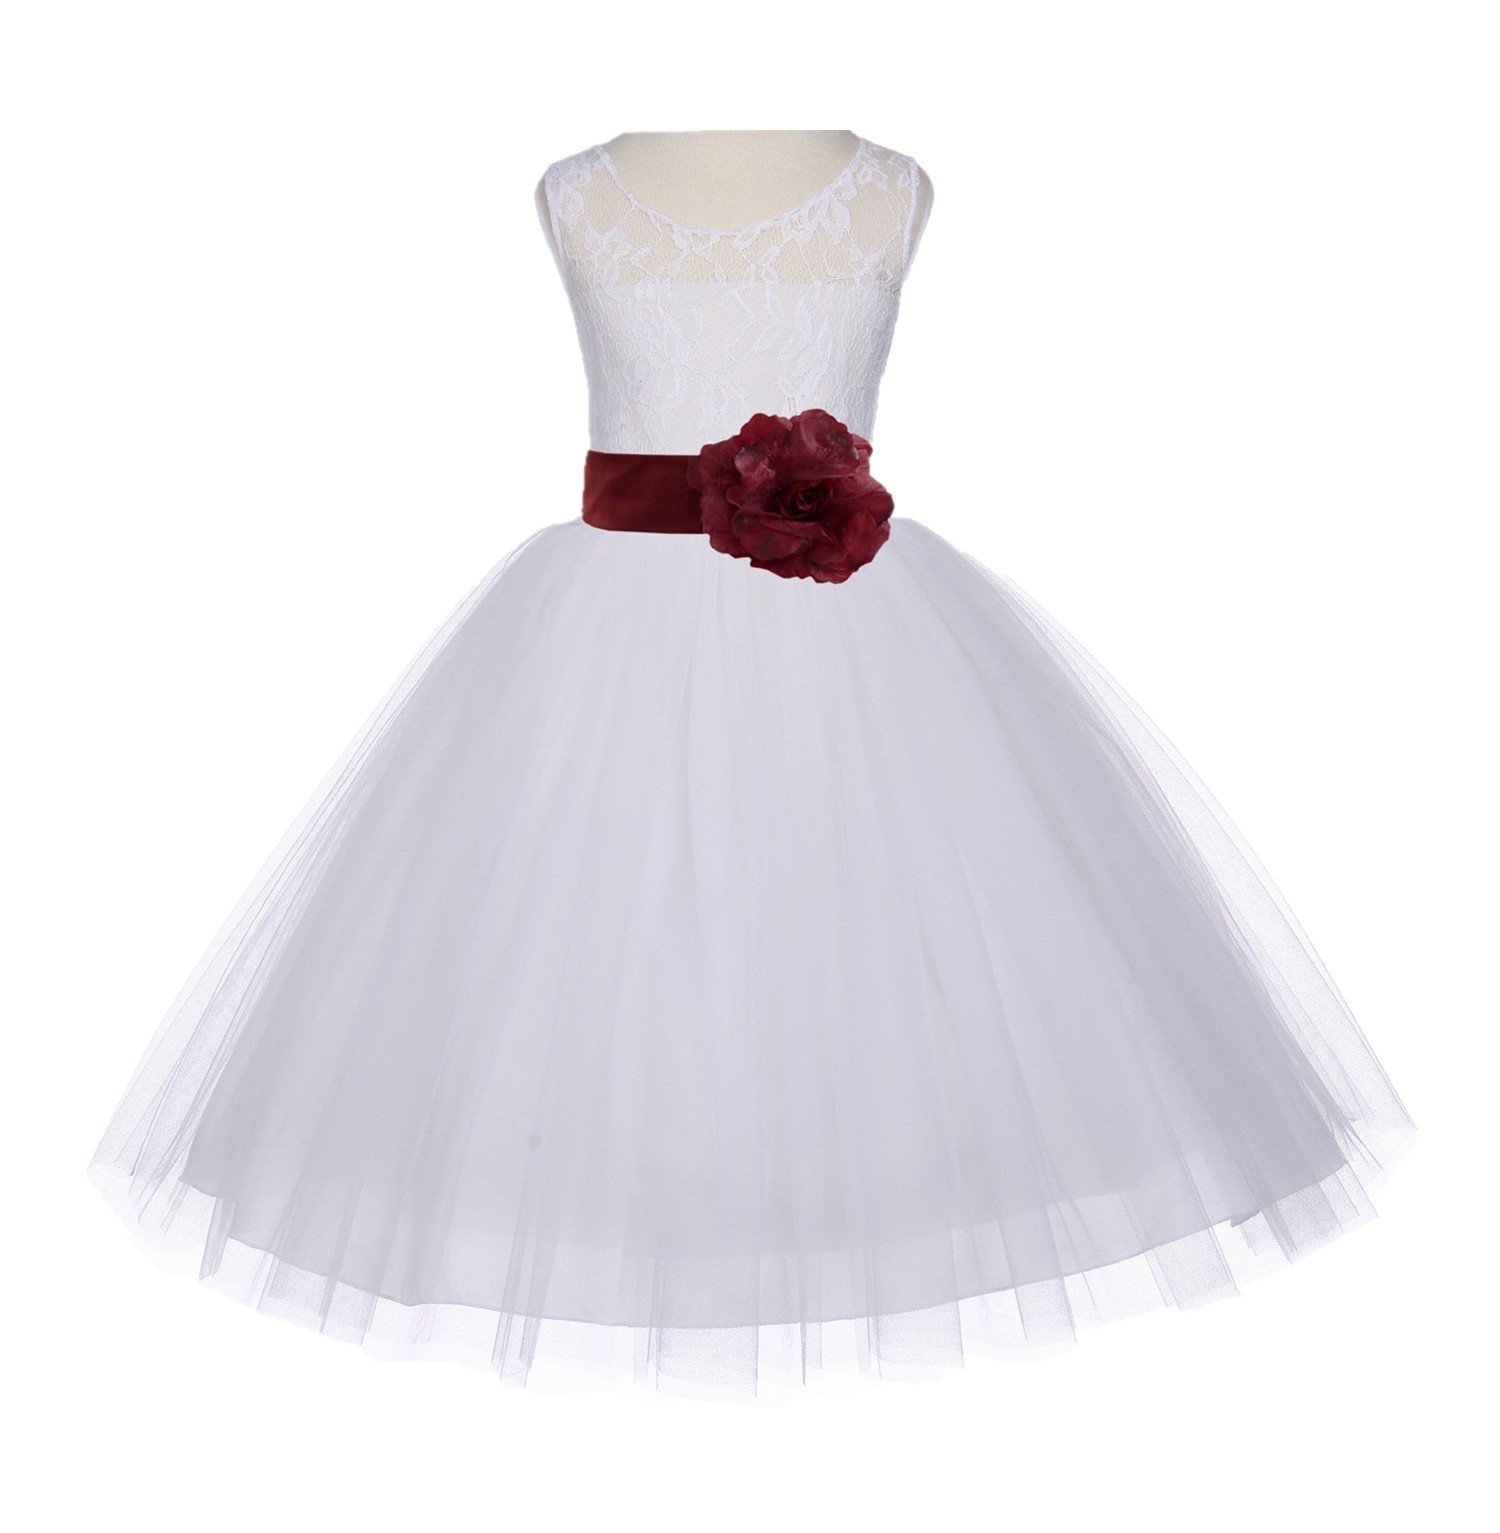 Ivory/Burgundy Floral Lace Bodice Tulle Flower Girl Dress Bridesmaid 153S